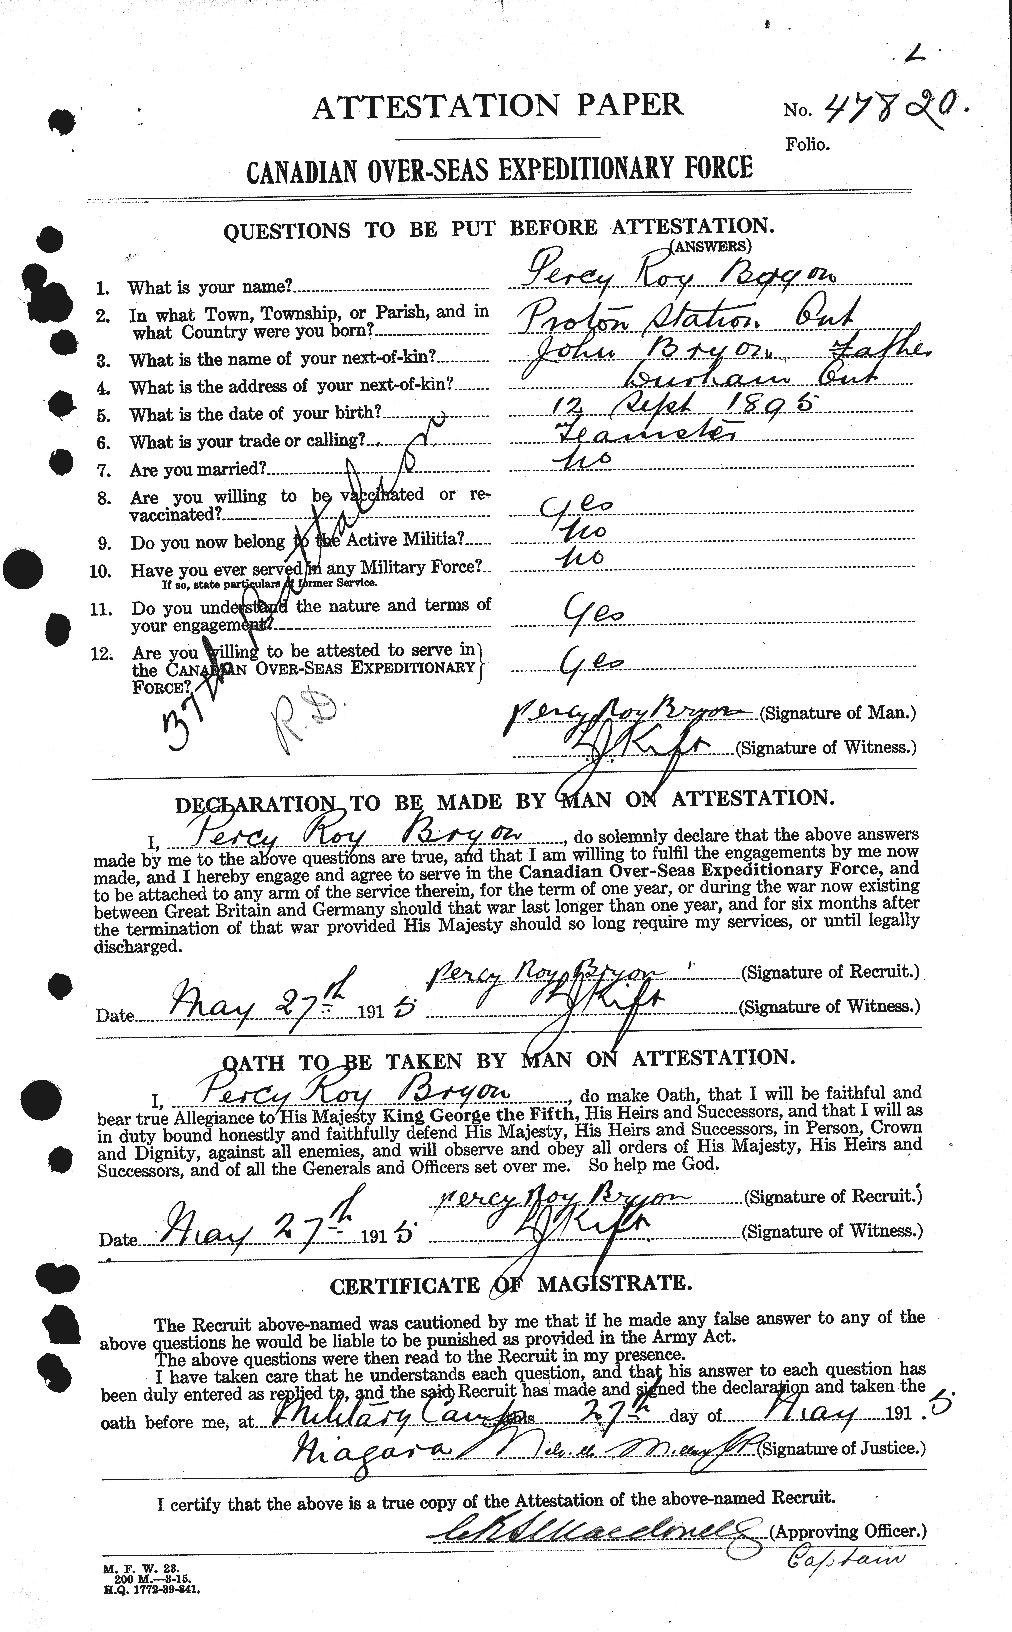 Personnel Records of the First World War - CEF 268900a